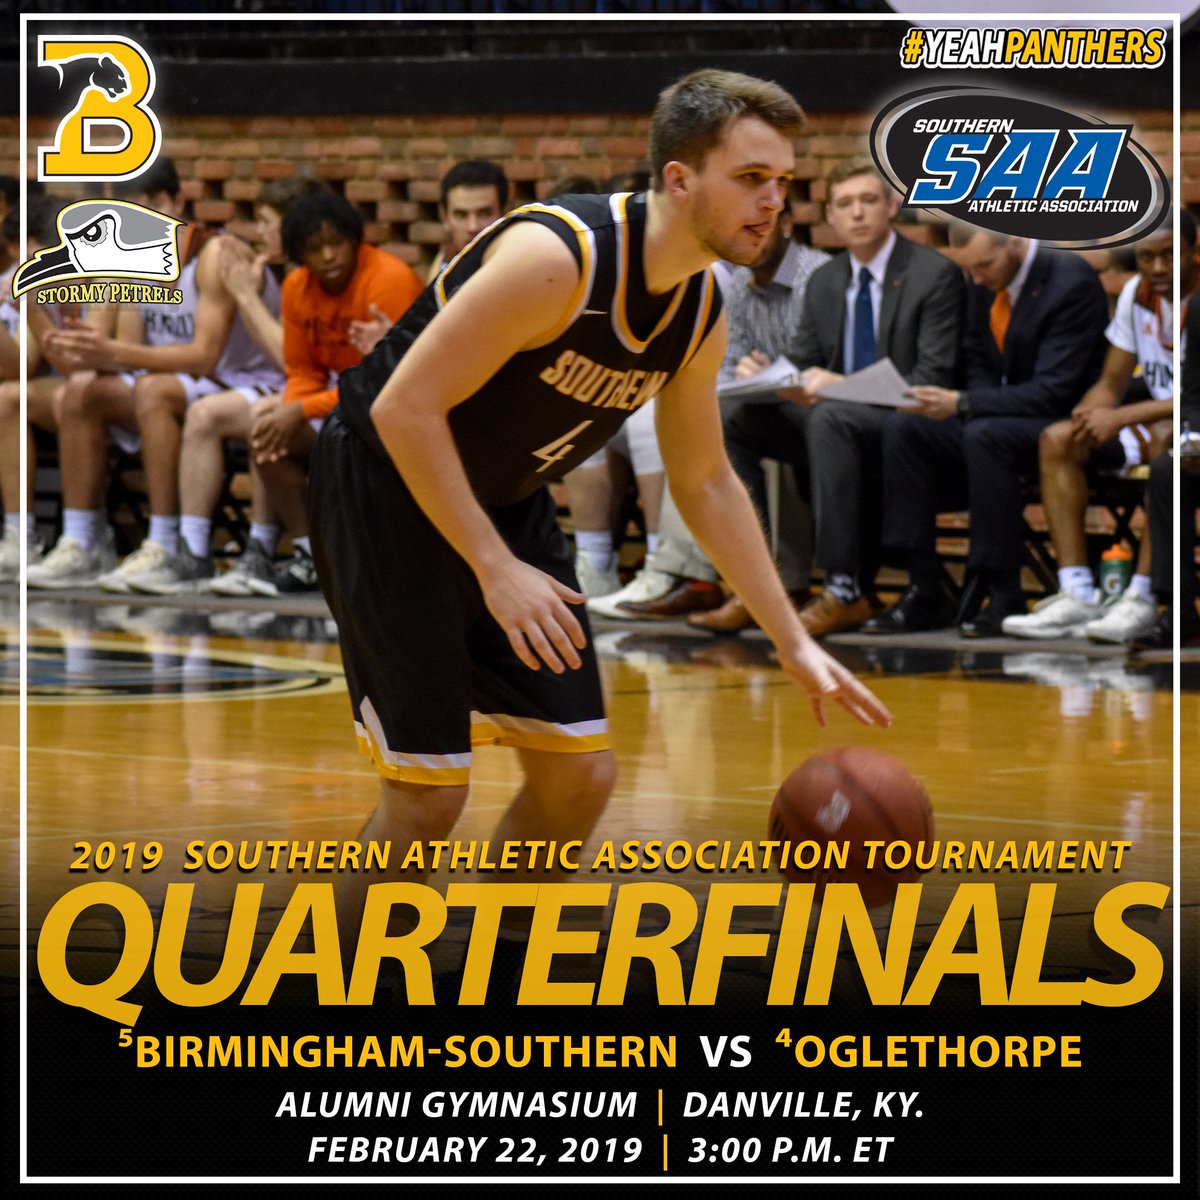 🏀 No. 5 seed @bschoops opens the 2019 @SAA_Sports Men's Basketball Tournament against the fourth-seeded Stormy Petrels today! #yeahpanthers 🆚 @OgleAthletics1 📍 Danville, Ky. ⌚️ 3 p.m. ET 📊 ow.ly/3OfE30nMOjc 👀 ow.ly/lwf630nMOkk